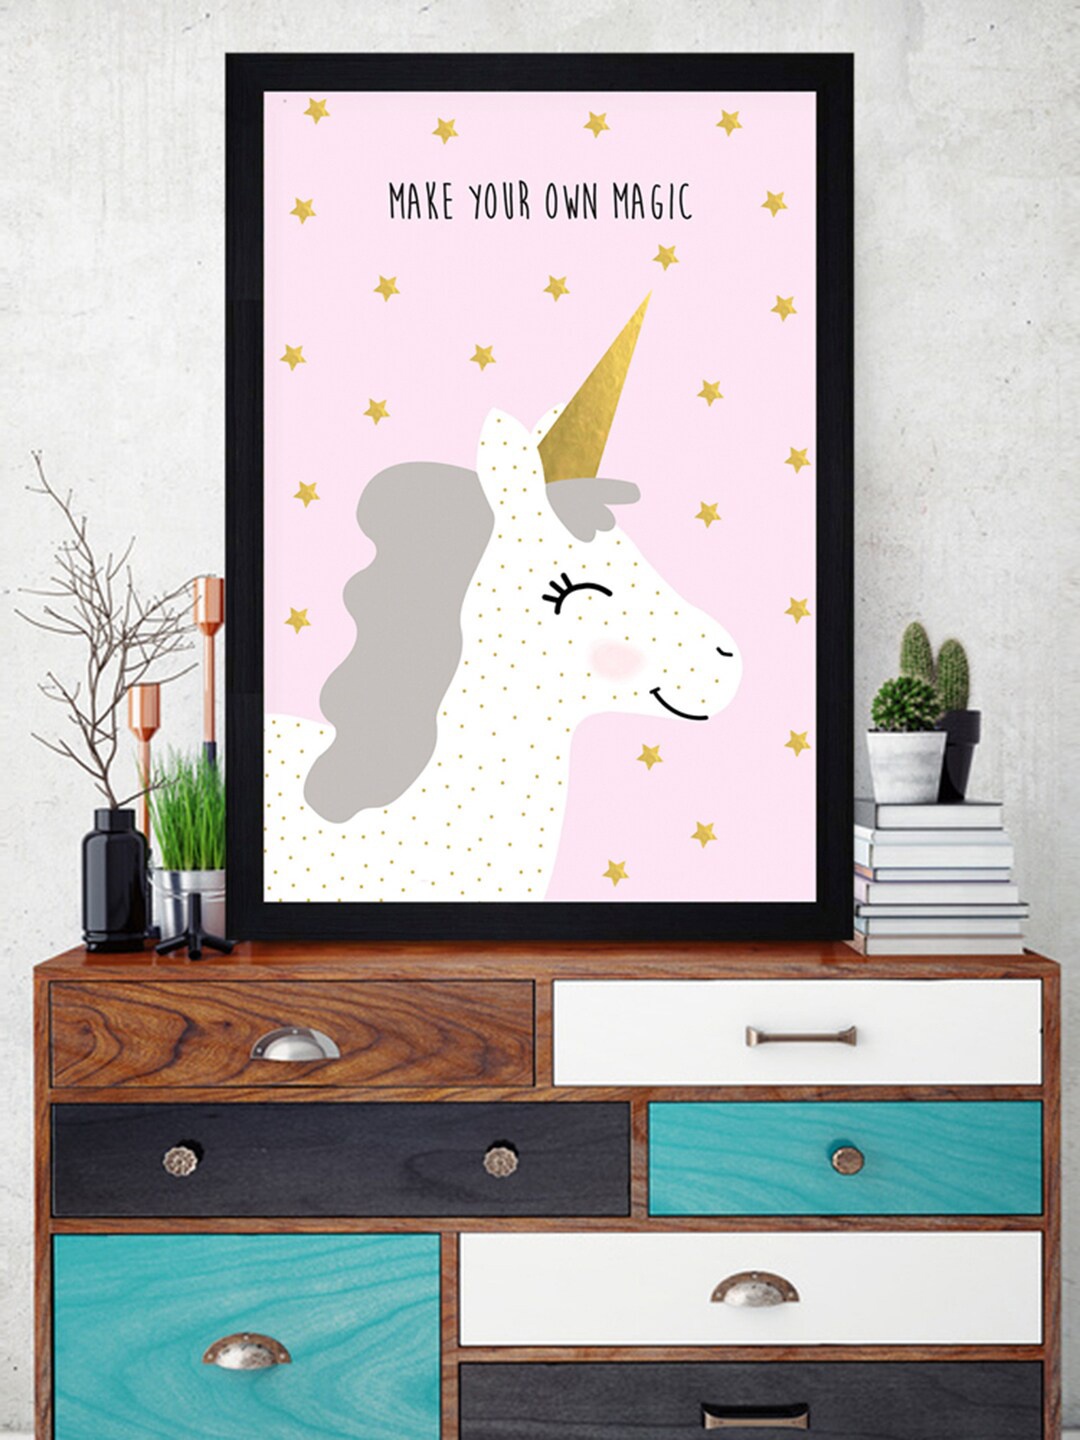 

Gallery99 Pink & White Make Your Own Magic Painted Wall Art